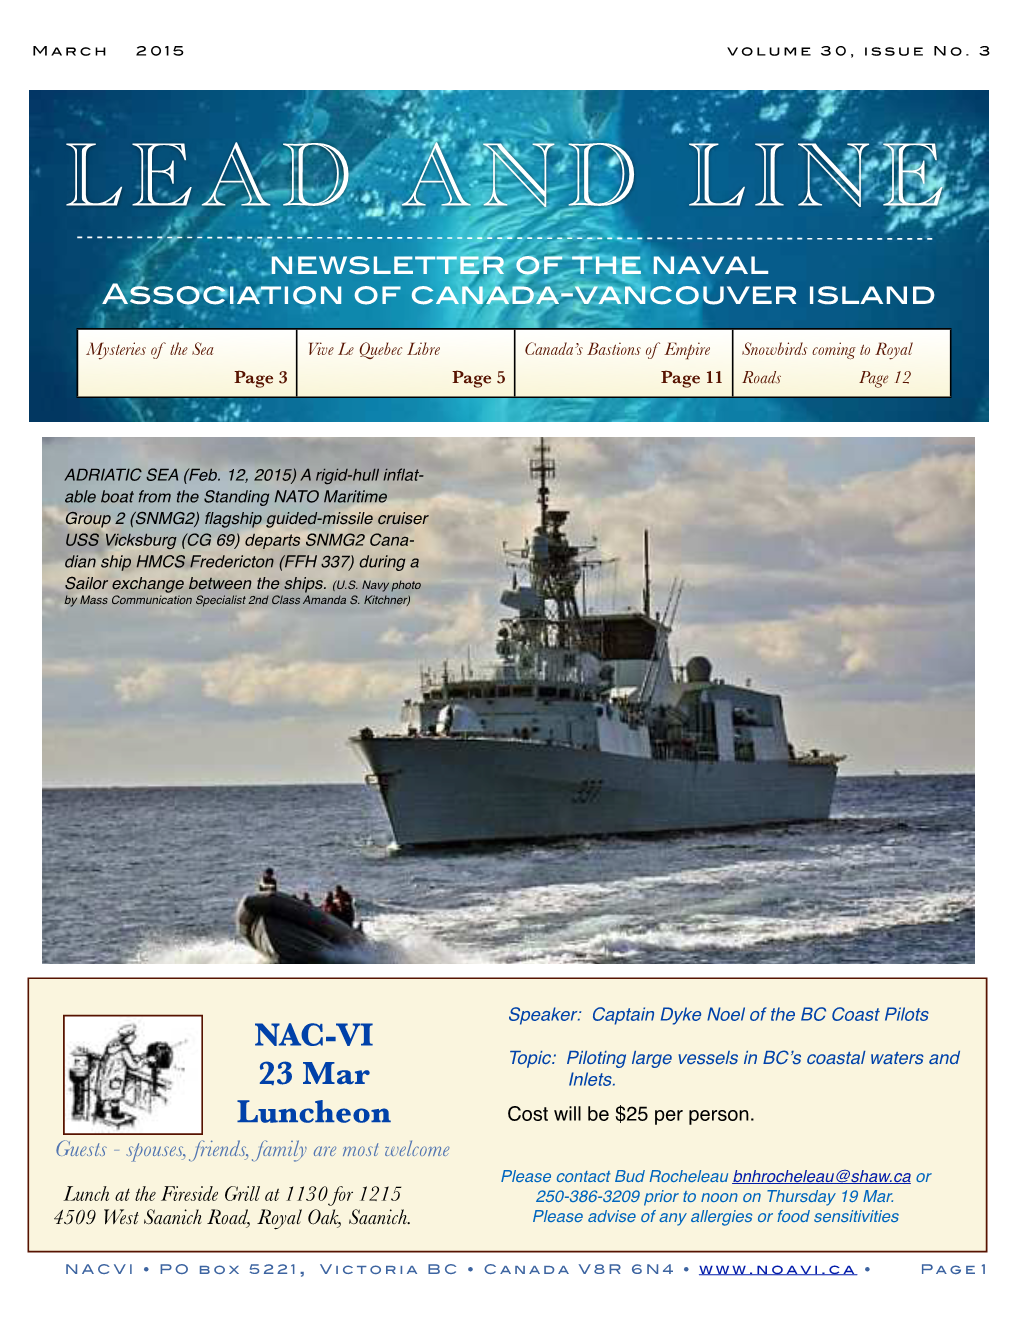 Lead and Line Mar 2015